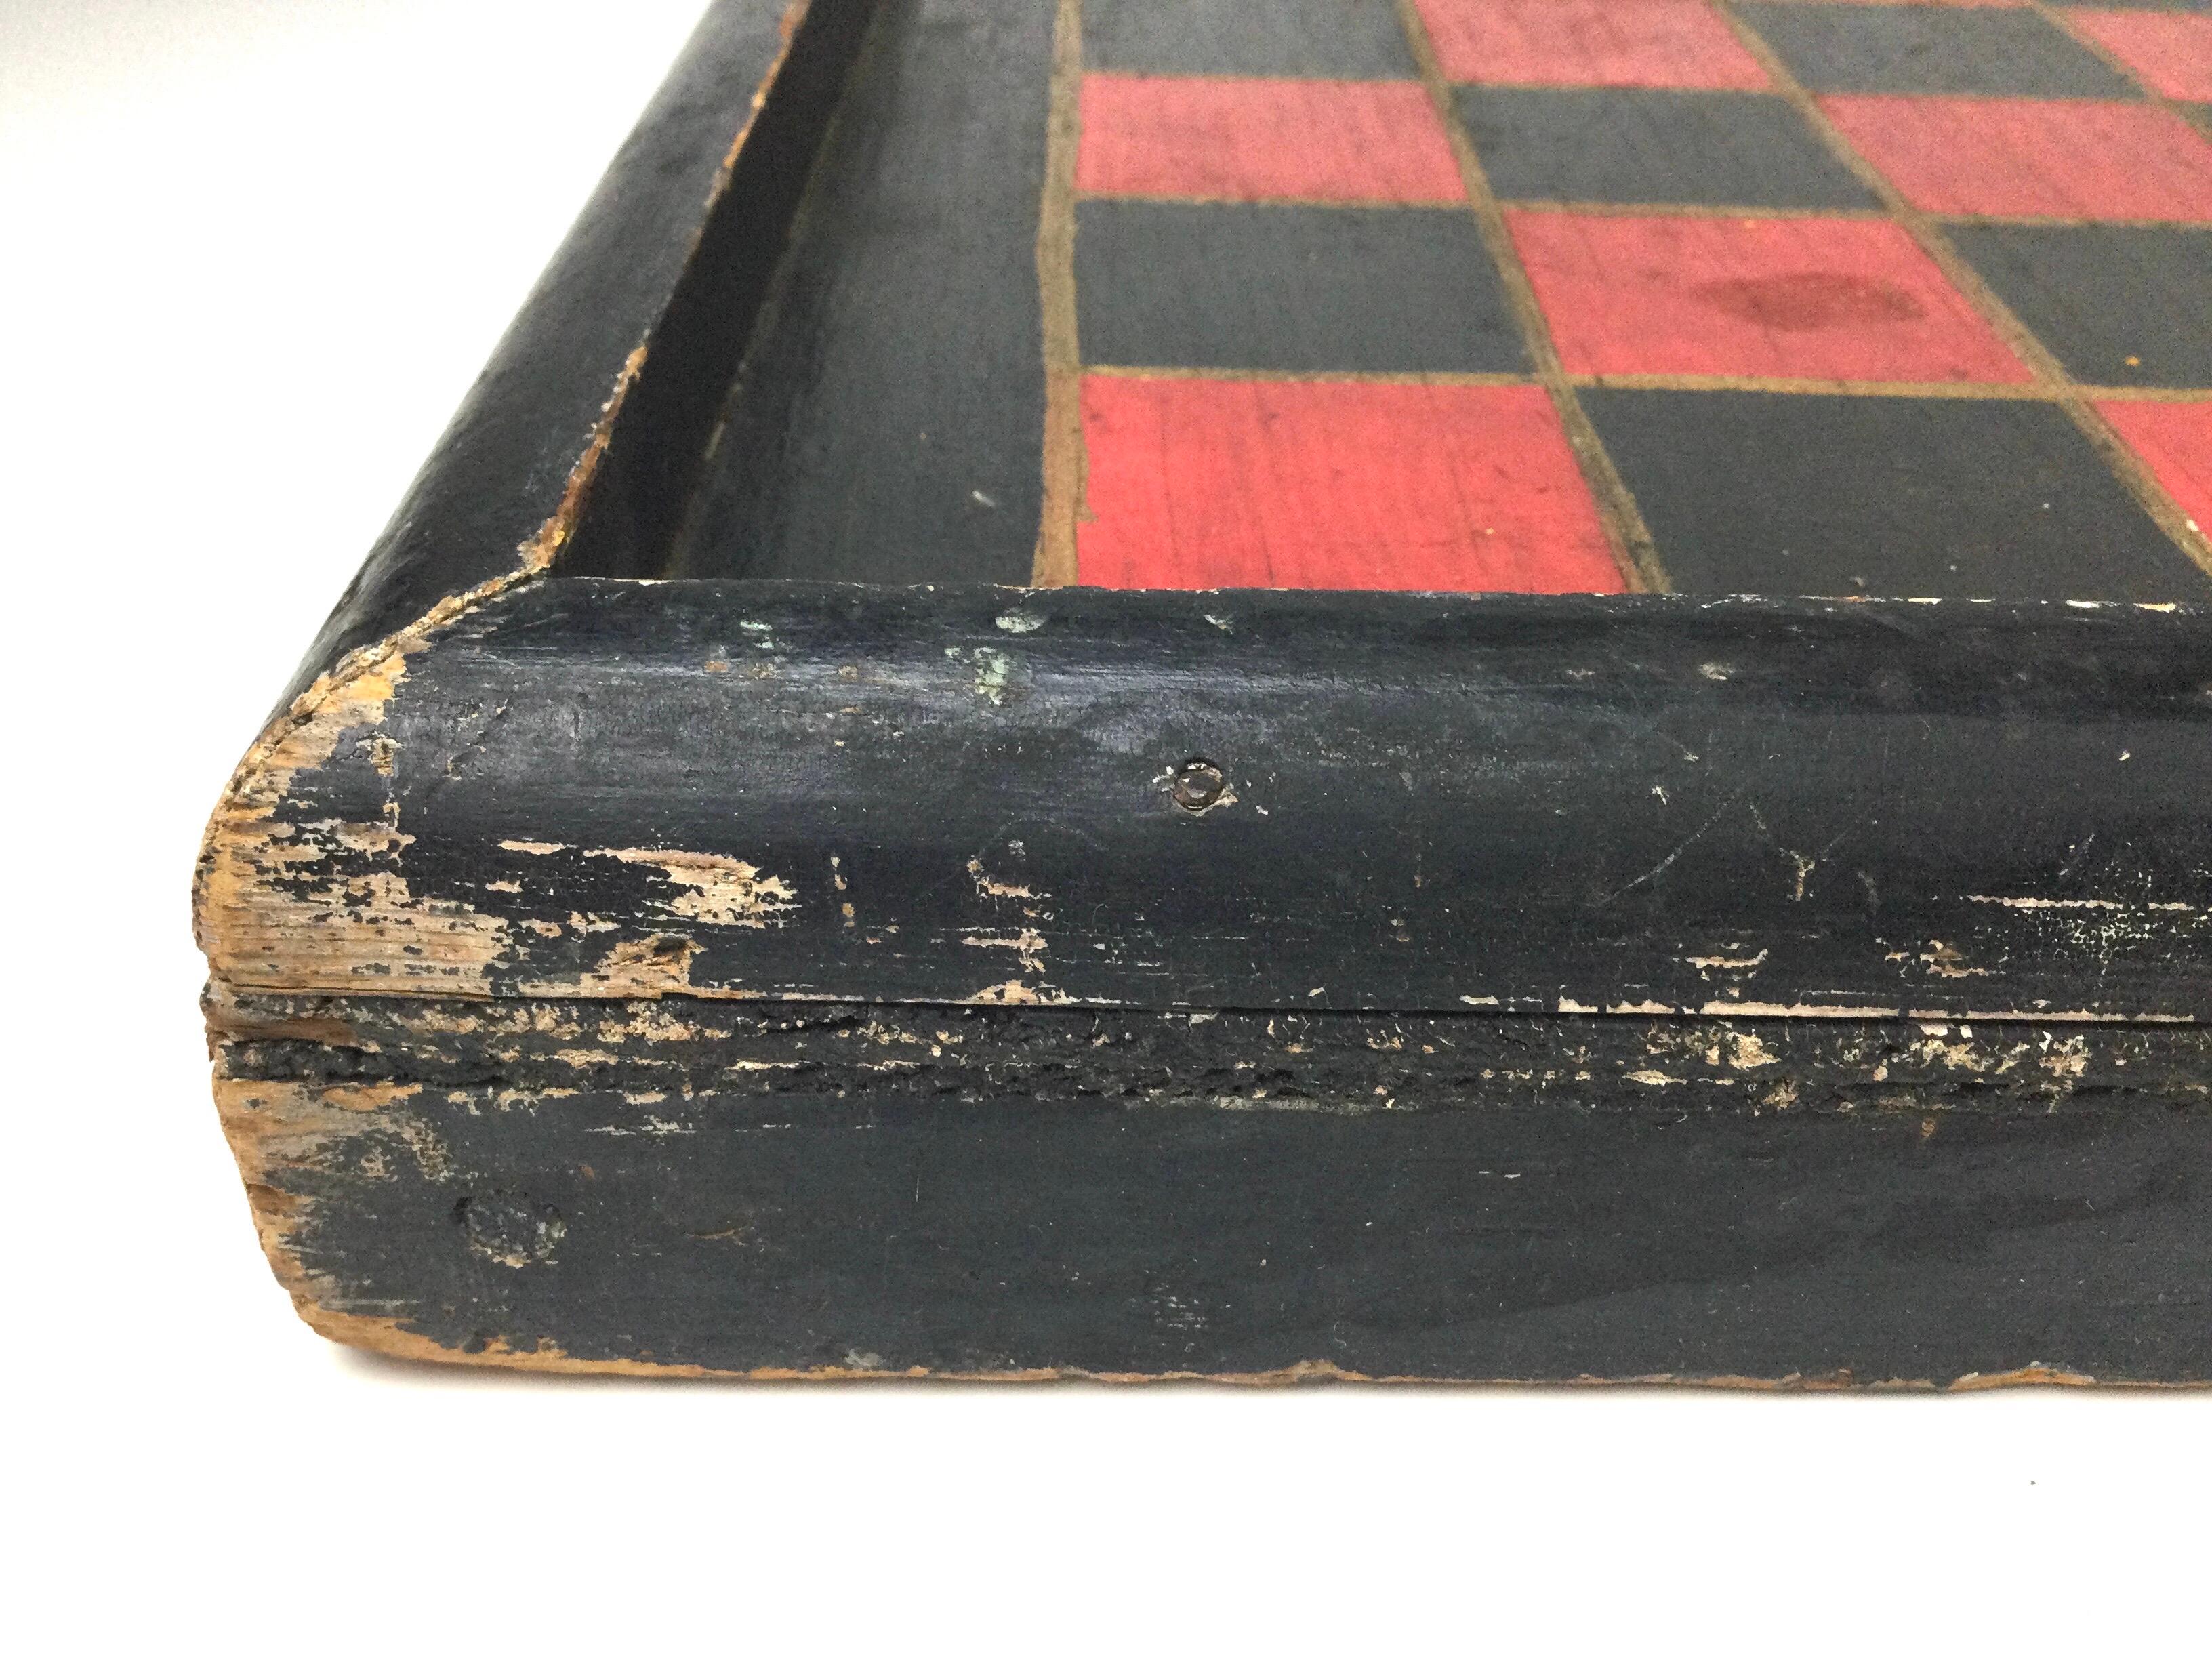 Hand-Painted 19th Century Game Board in Original Painted Red and Black Original Surface For Sale